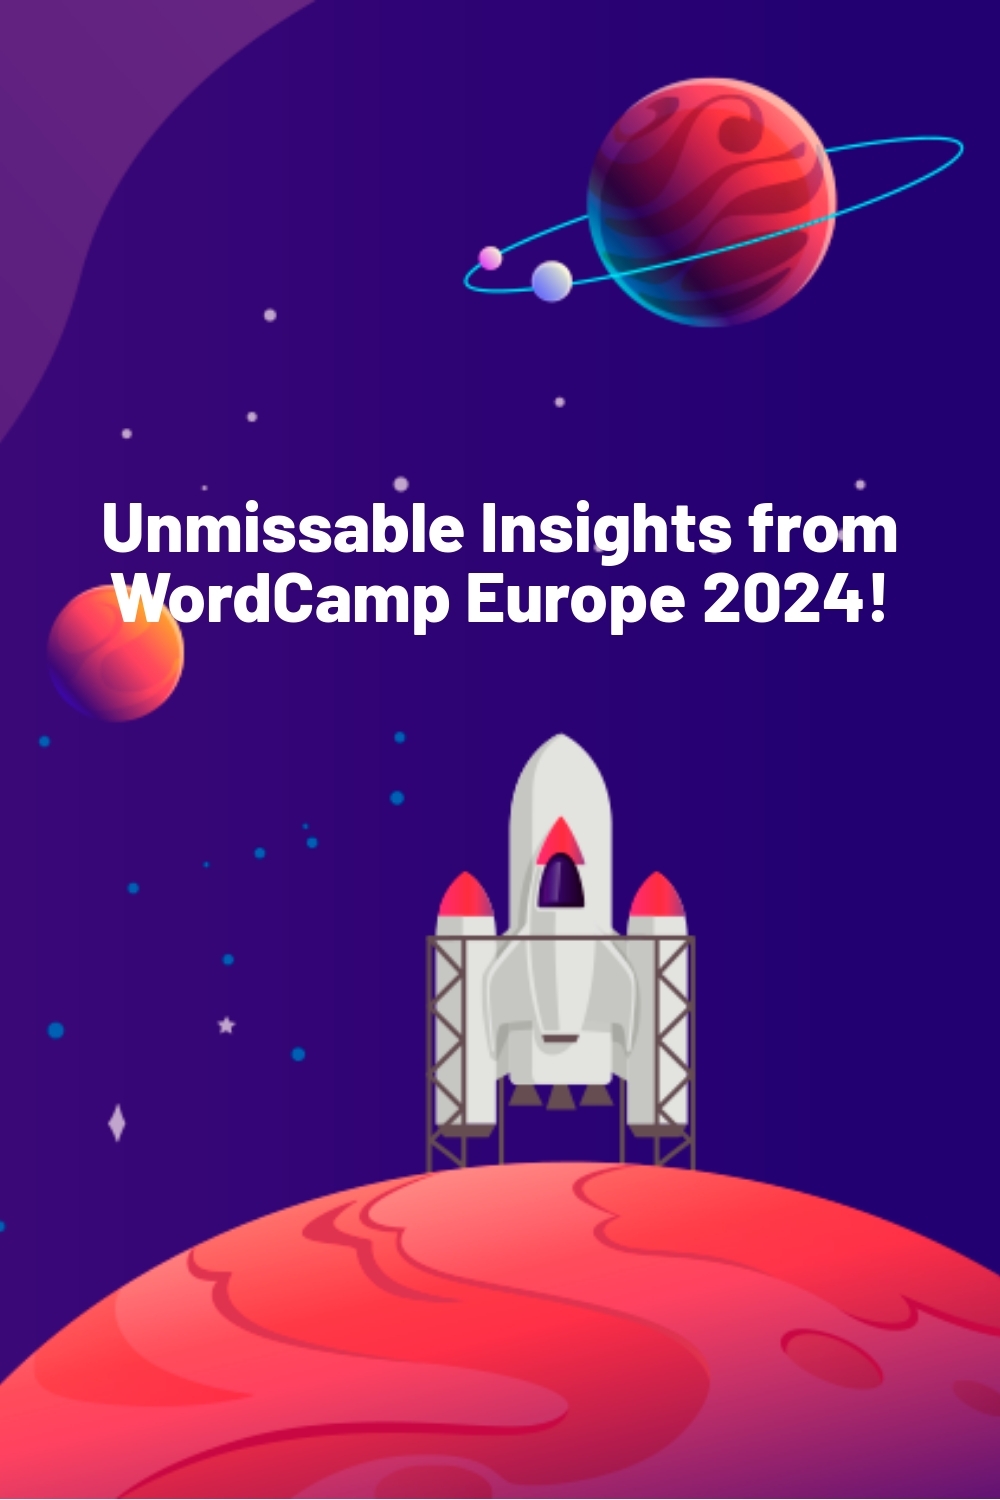 Unmissable Insights from WordCamp Europe 2024!